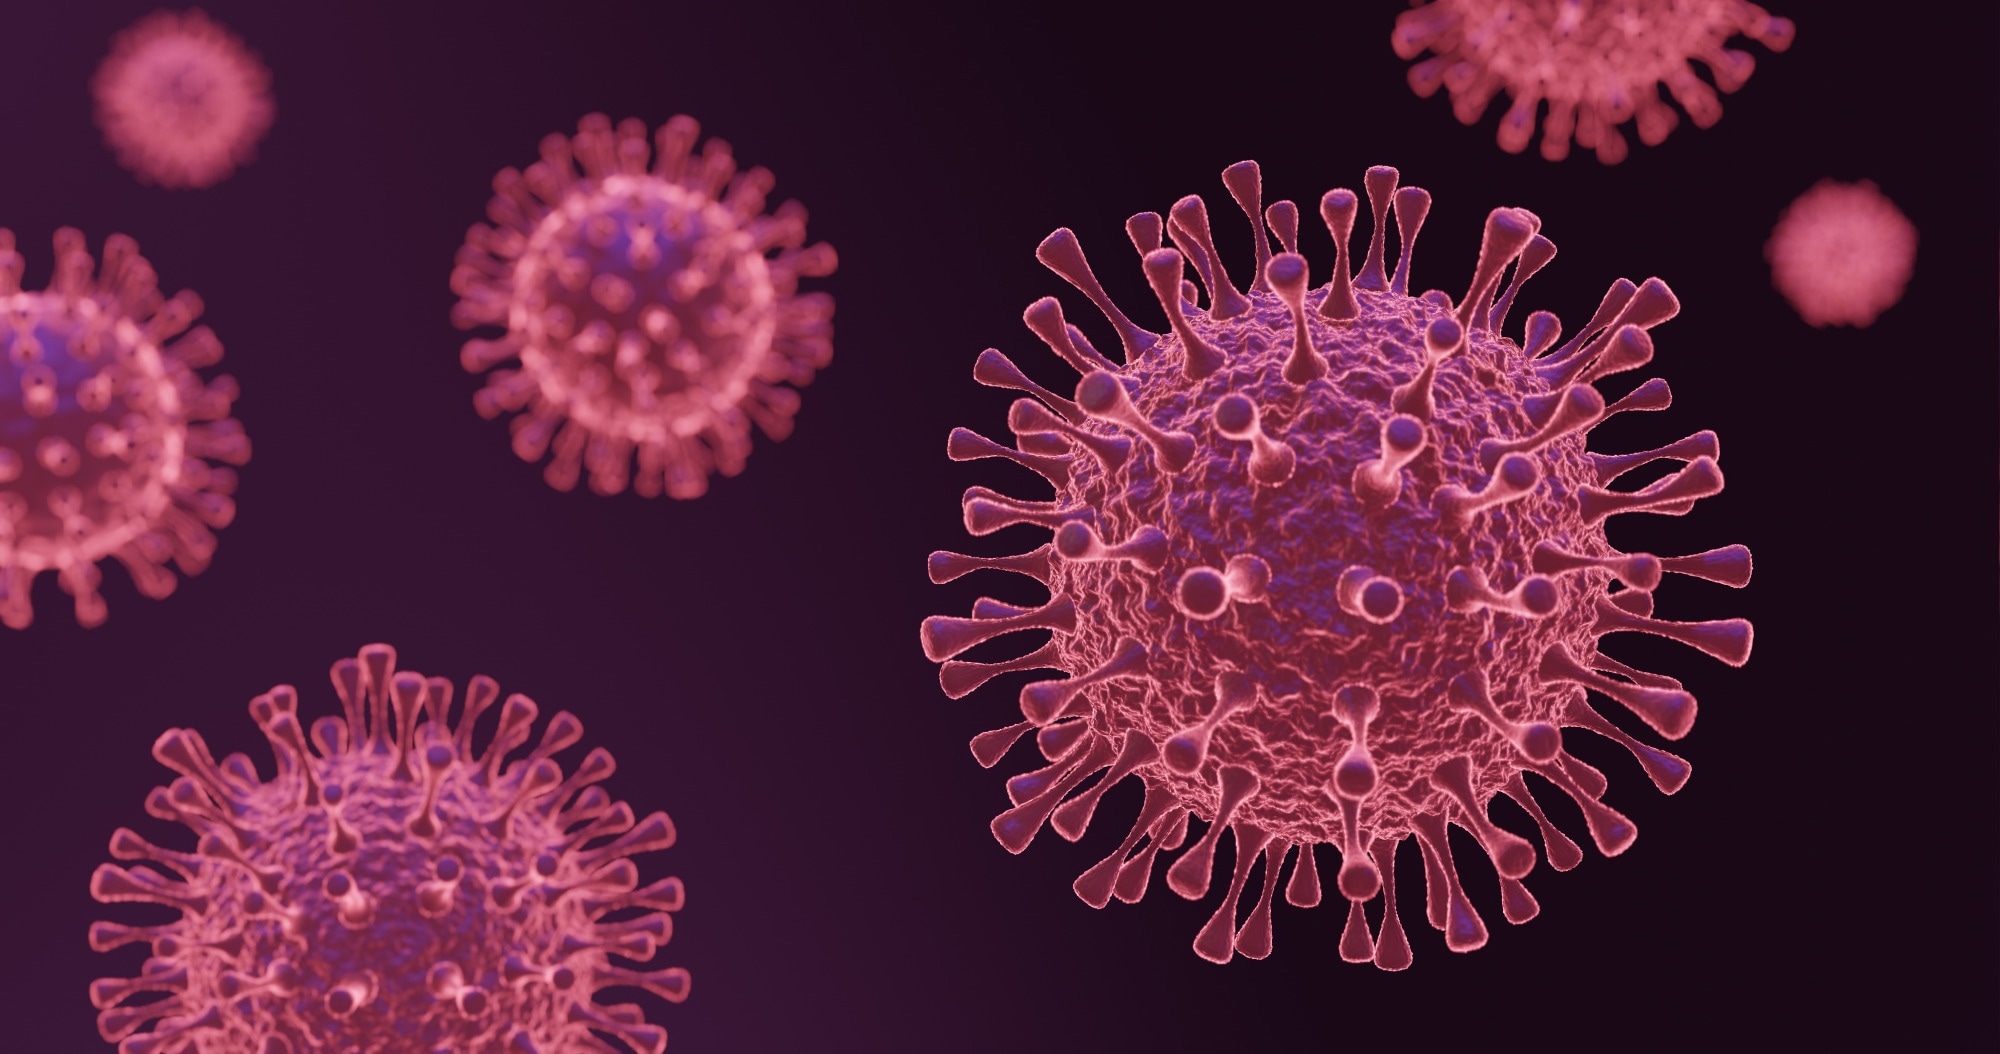 Study: Antibody escape, the risk of serotype formation, and rapid immune waning: modeling the implications of SARS-CoV-2 immune evasion. Image Credit: softpixel/Shutterstock